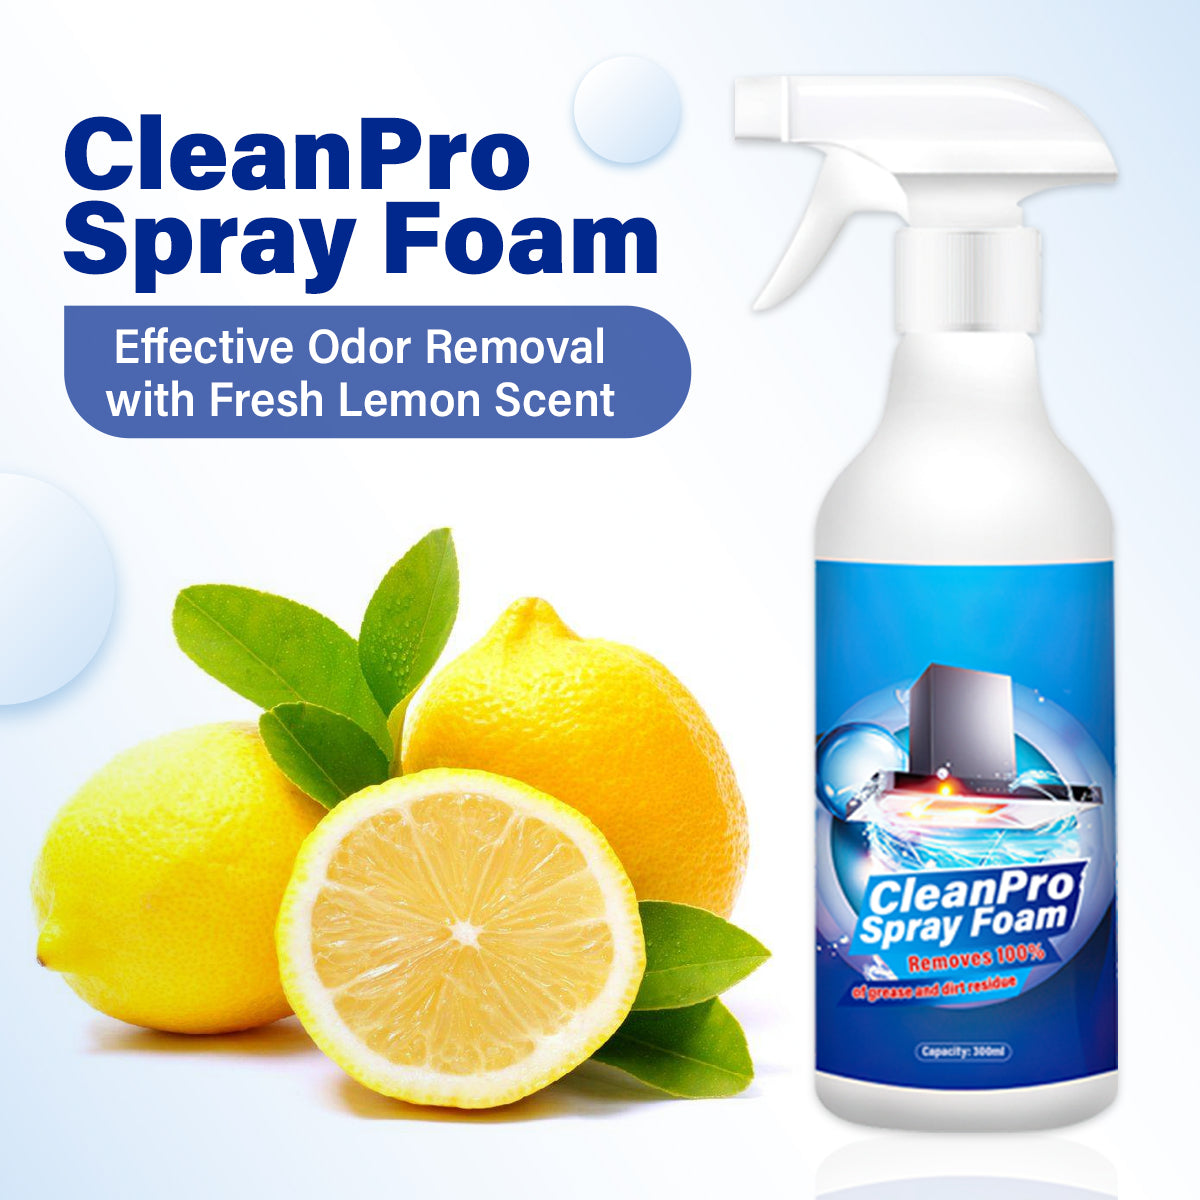 CleanPro Spray Foam: Your Time Saved, My Quality Delivered